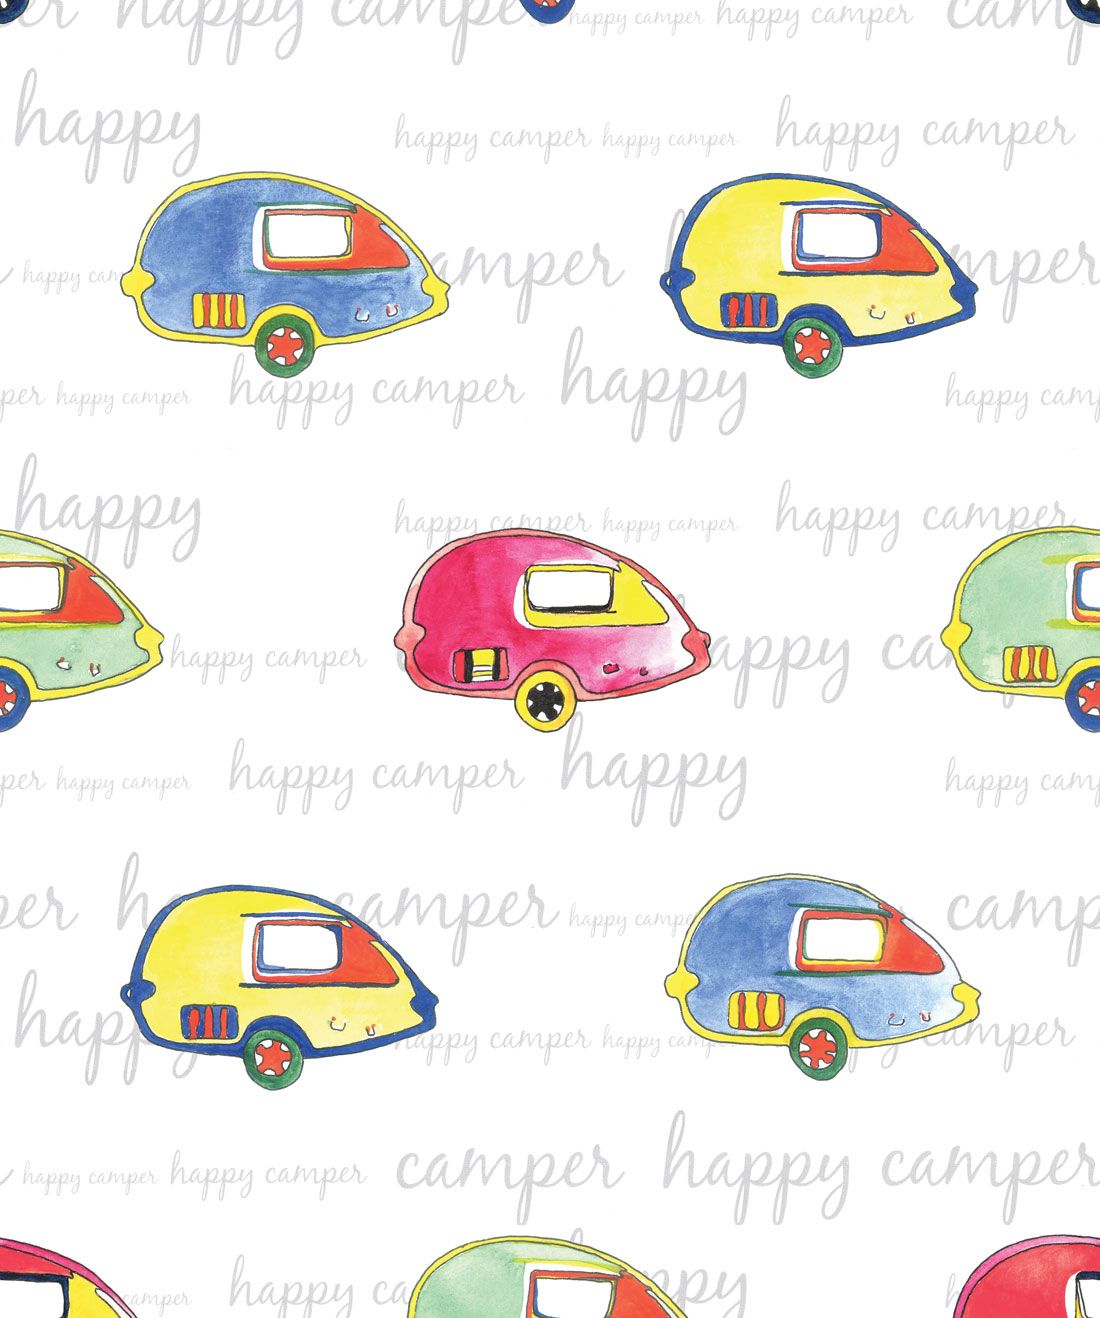 Happy Camper is a Camping wallpaper